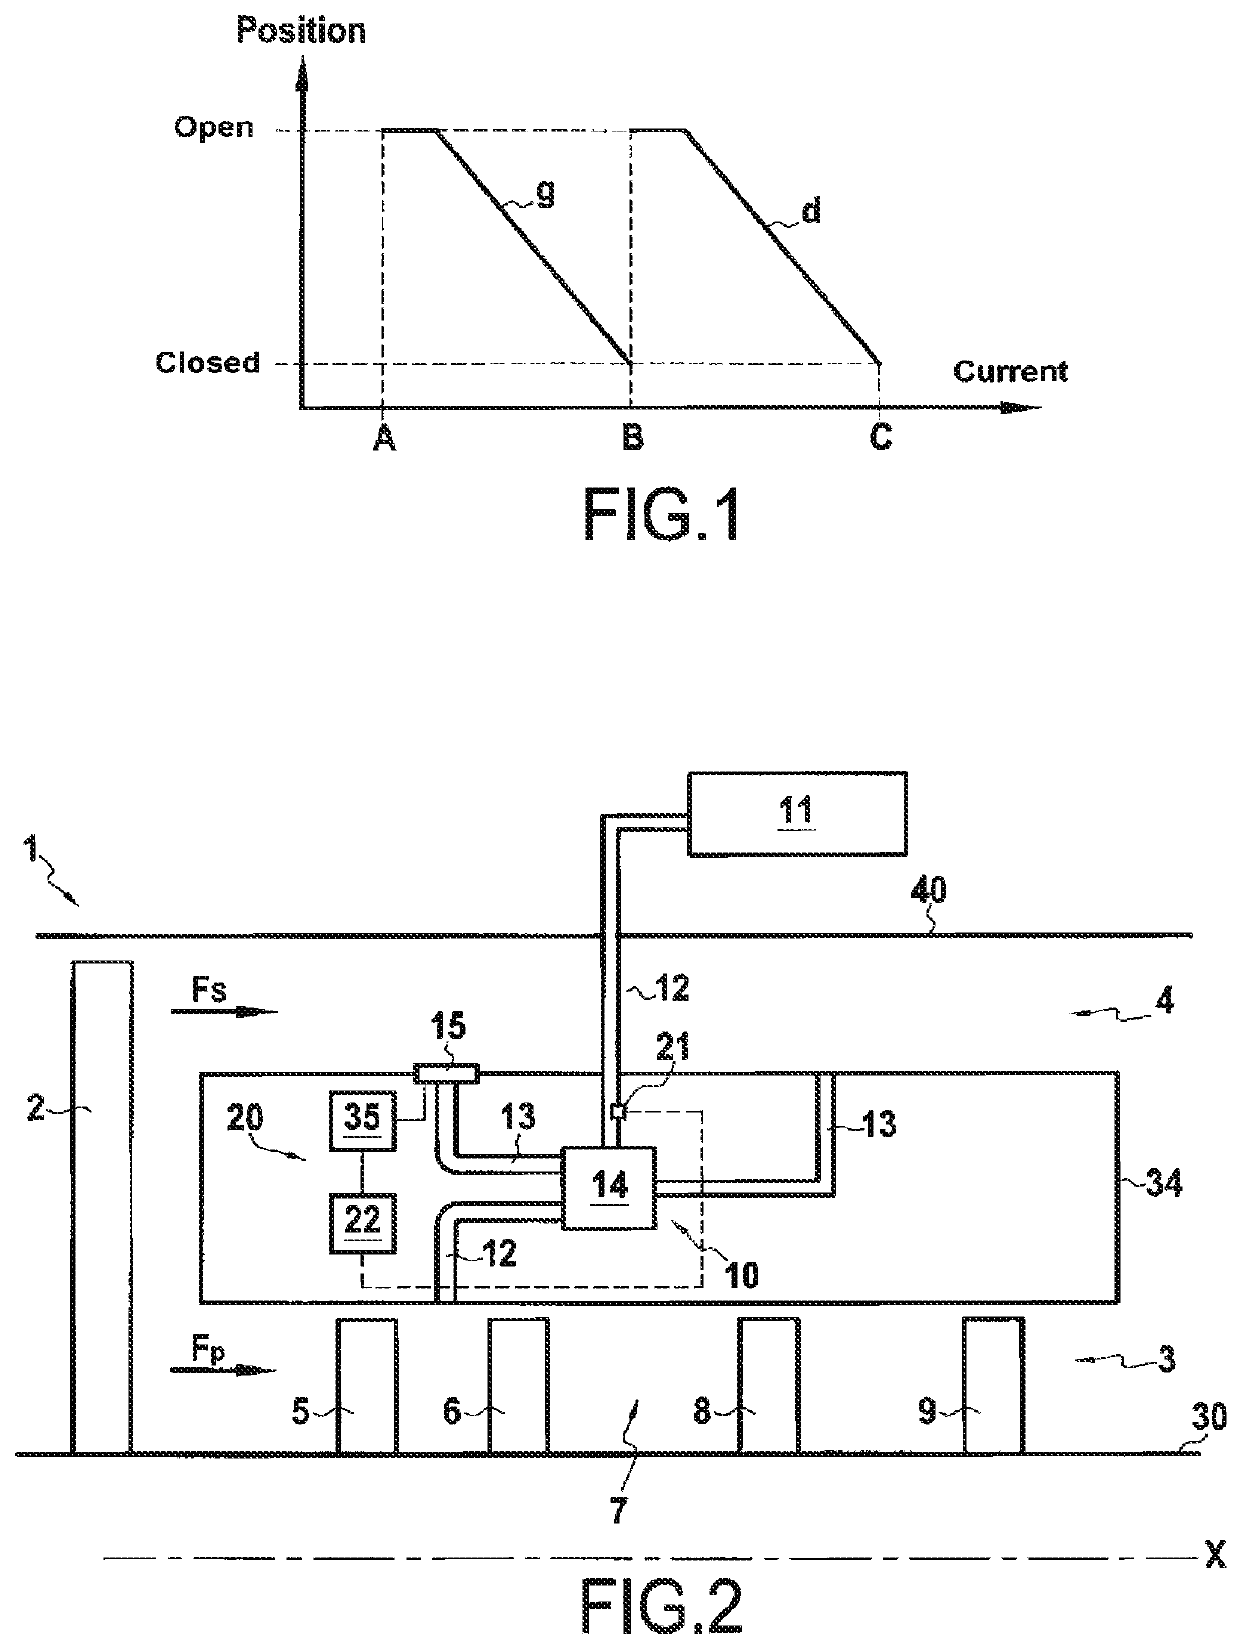 Unit for controlling a controlled valve for abstracting an airflow from a pressurized airflow of an aircraft